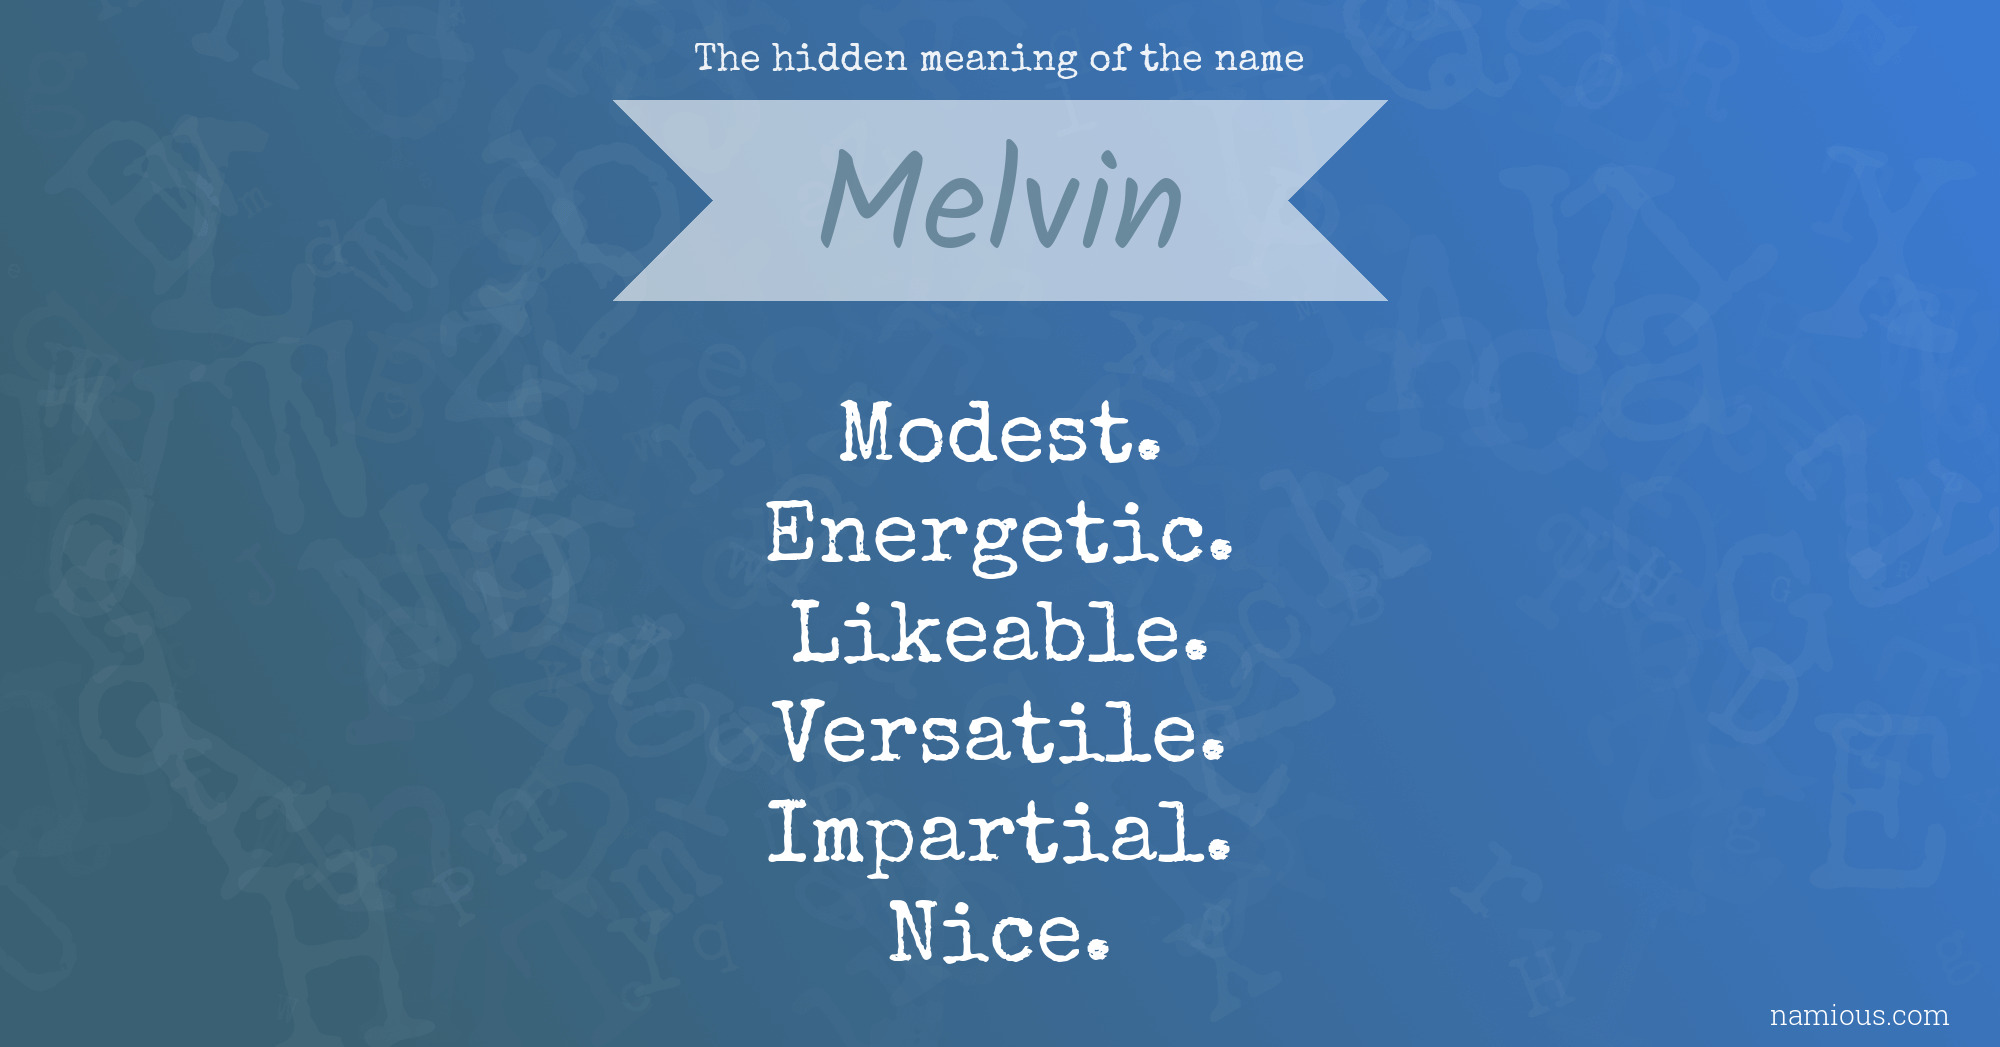 The hidden meaning of the name Melvin